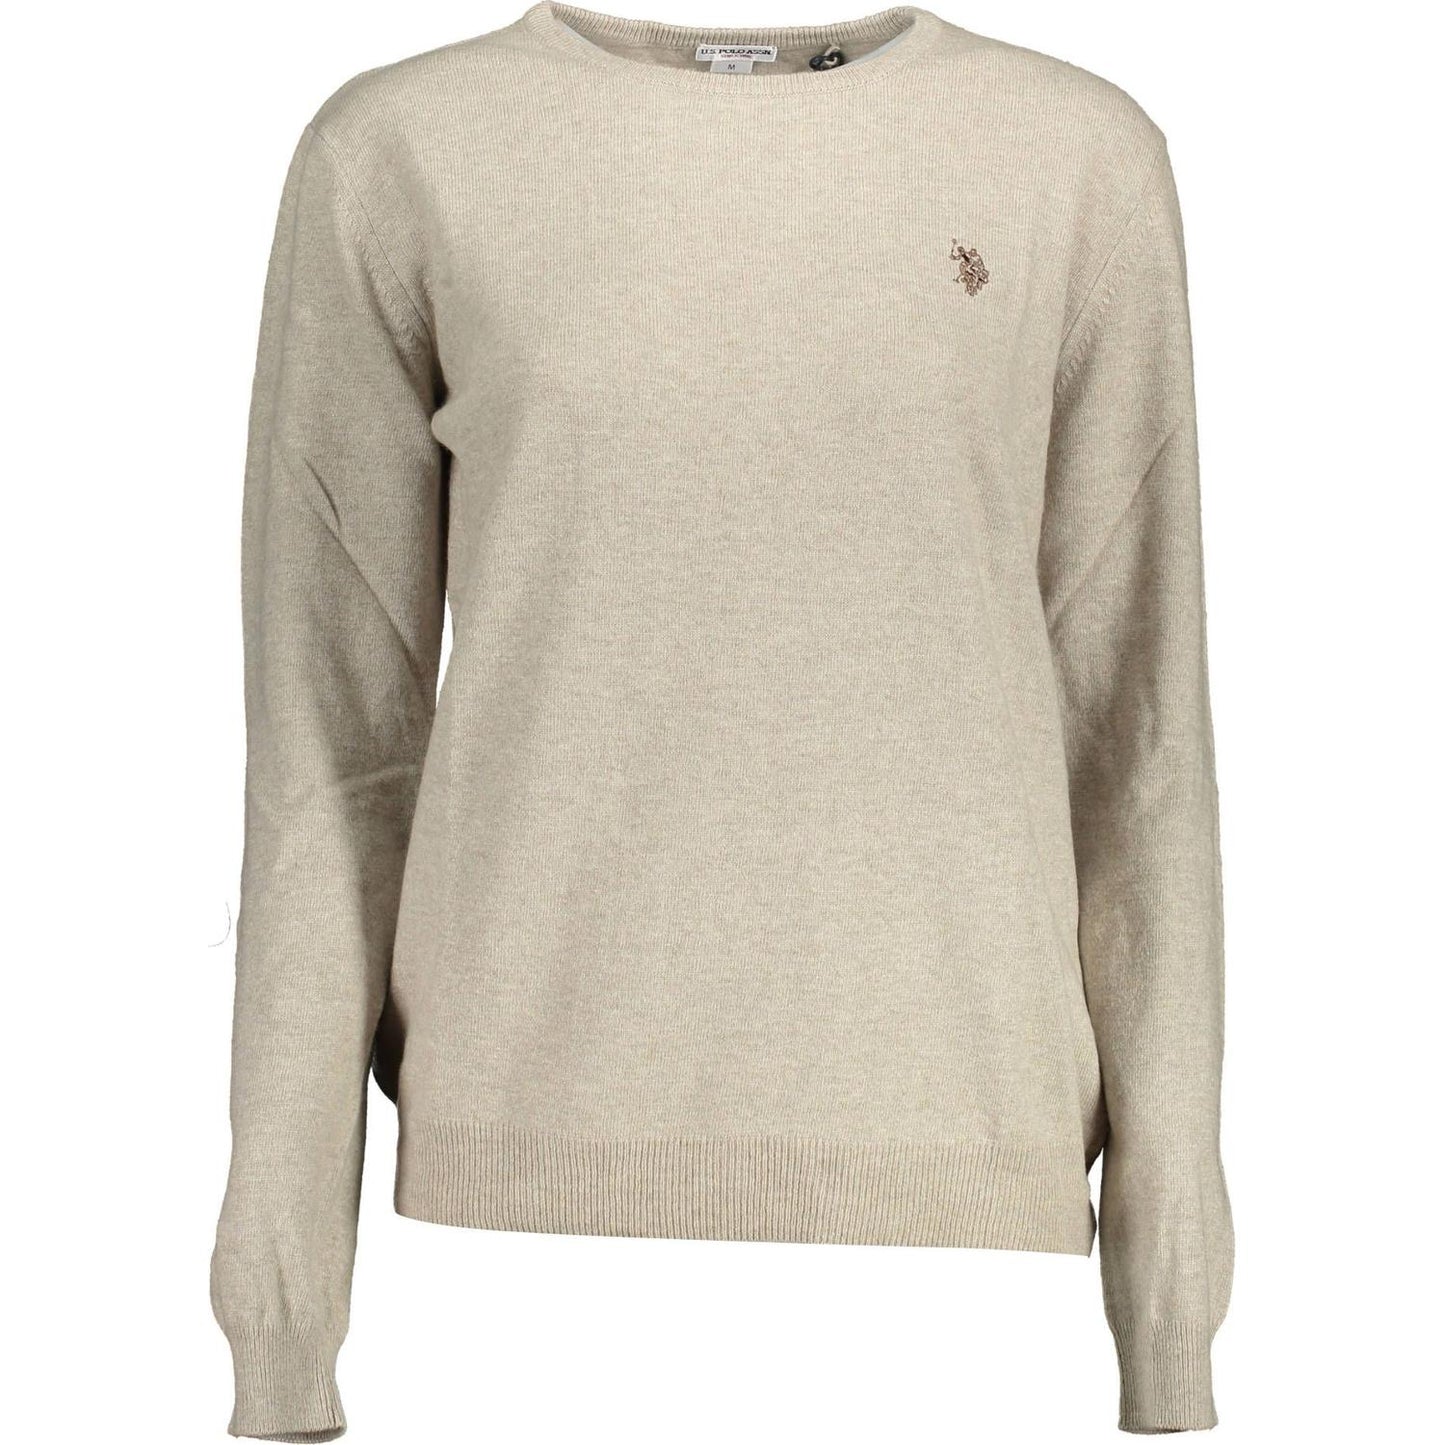 U.S. POLO ASSN. Chic Beige Embroidered Logo Sweater chic-beige-embroidered-logo-sweater